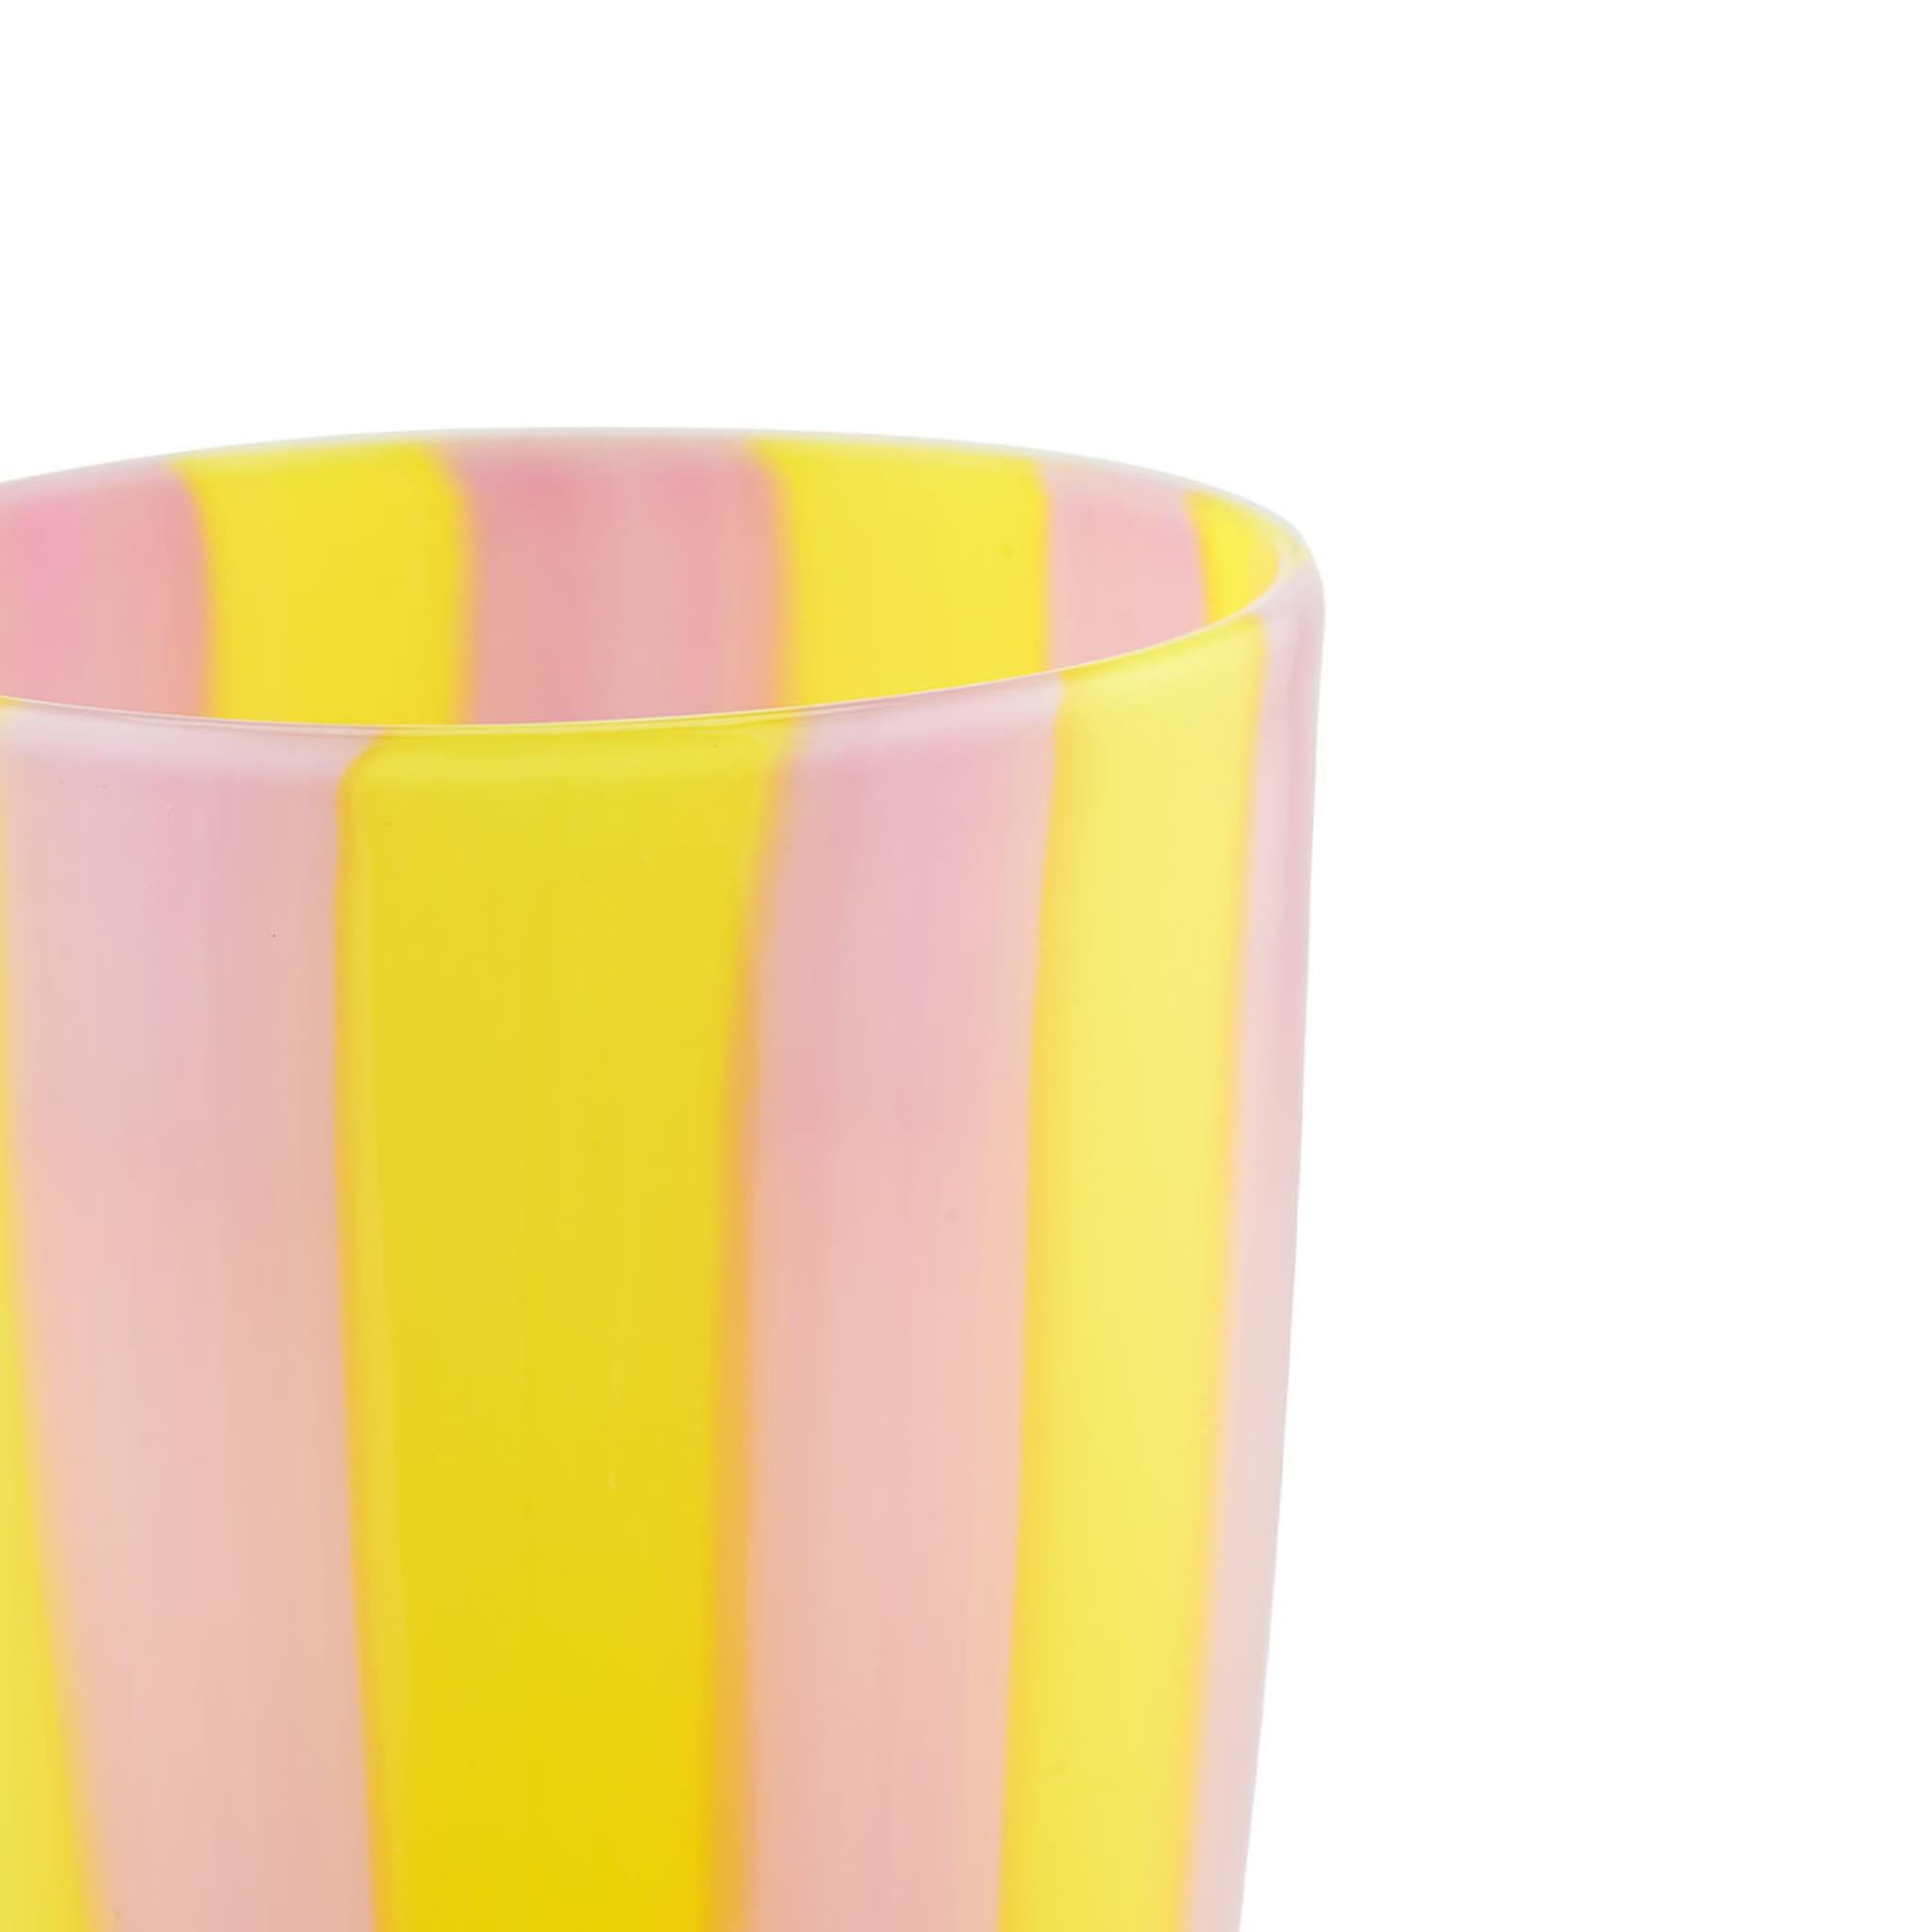 Dolce Vita Set of 2 Pink & Yellow Mouth-Blown Water Tumblers  - Alternative view 1